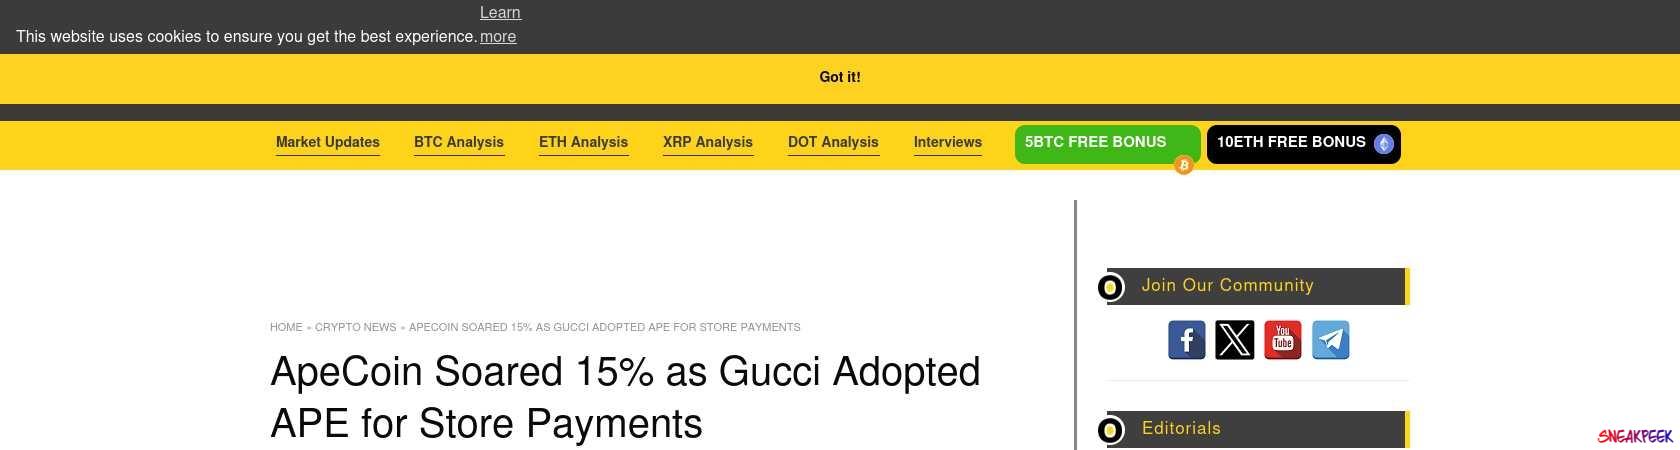 Read the full Article:  ⭲ ApeCoin Soared 15% as Gucci Adopted APE for Store Payments